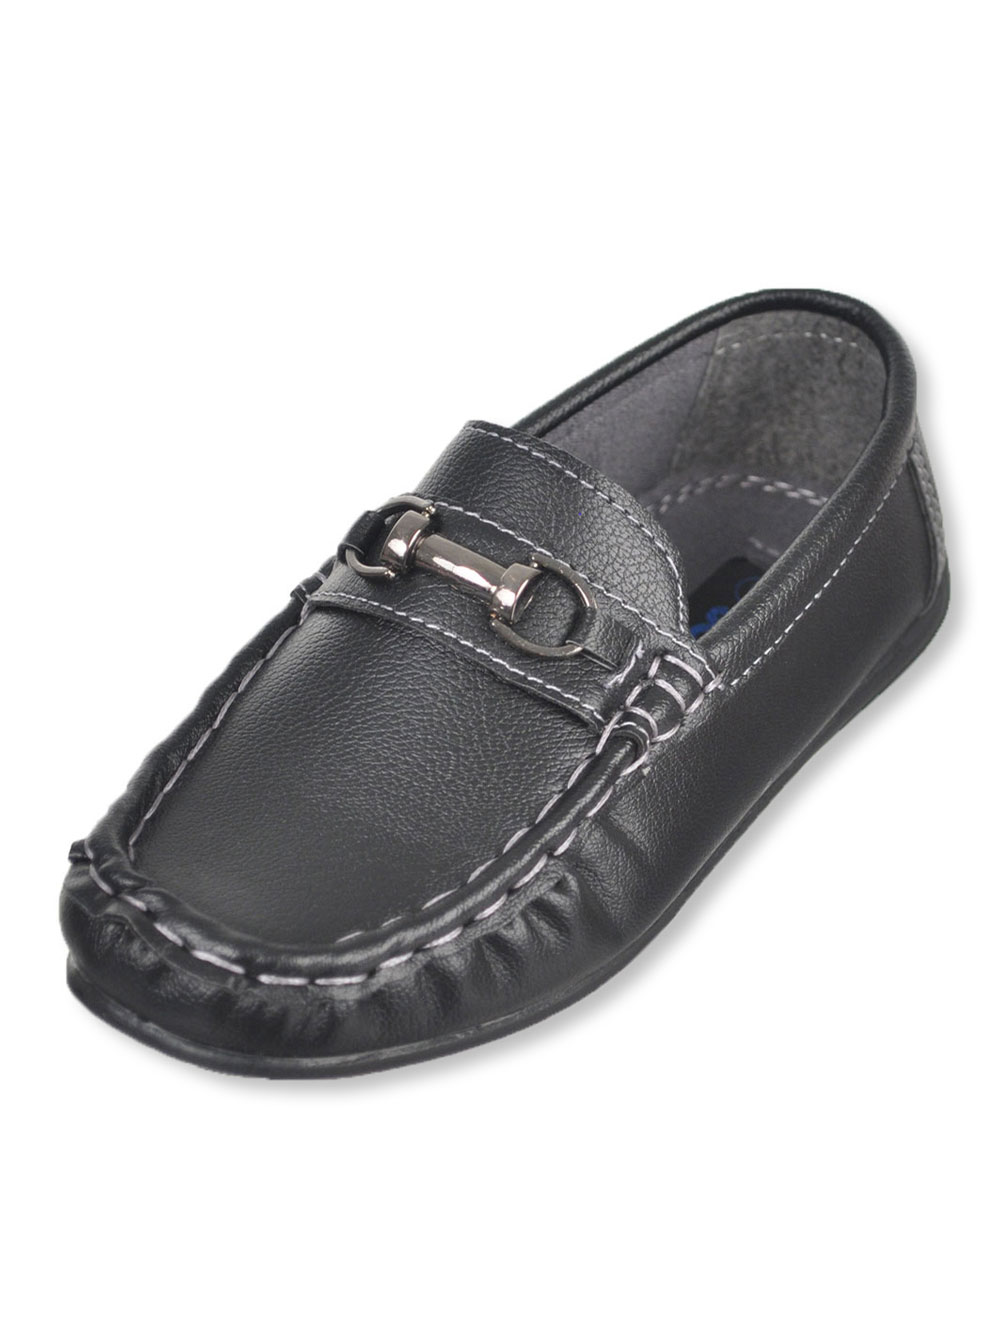 Dress Shoes Driving Loafers